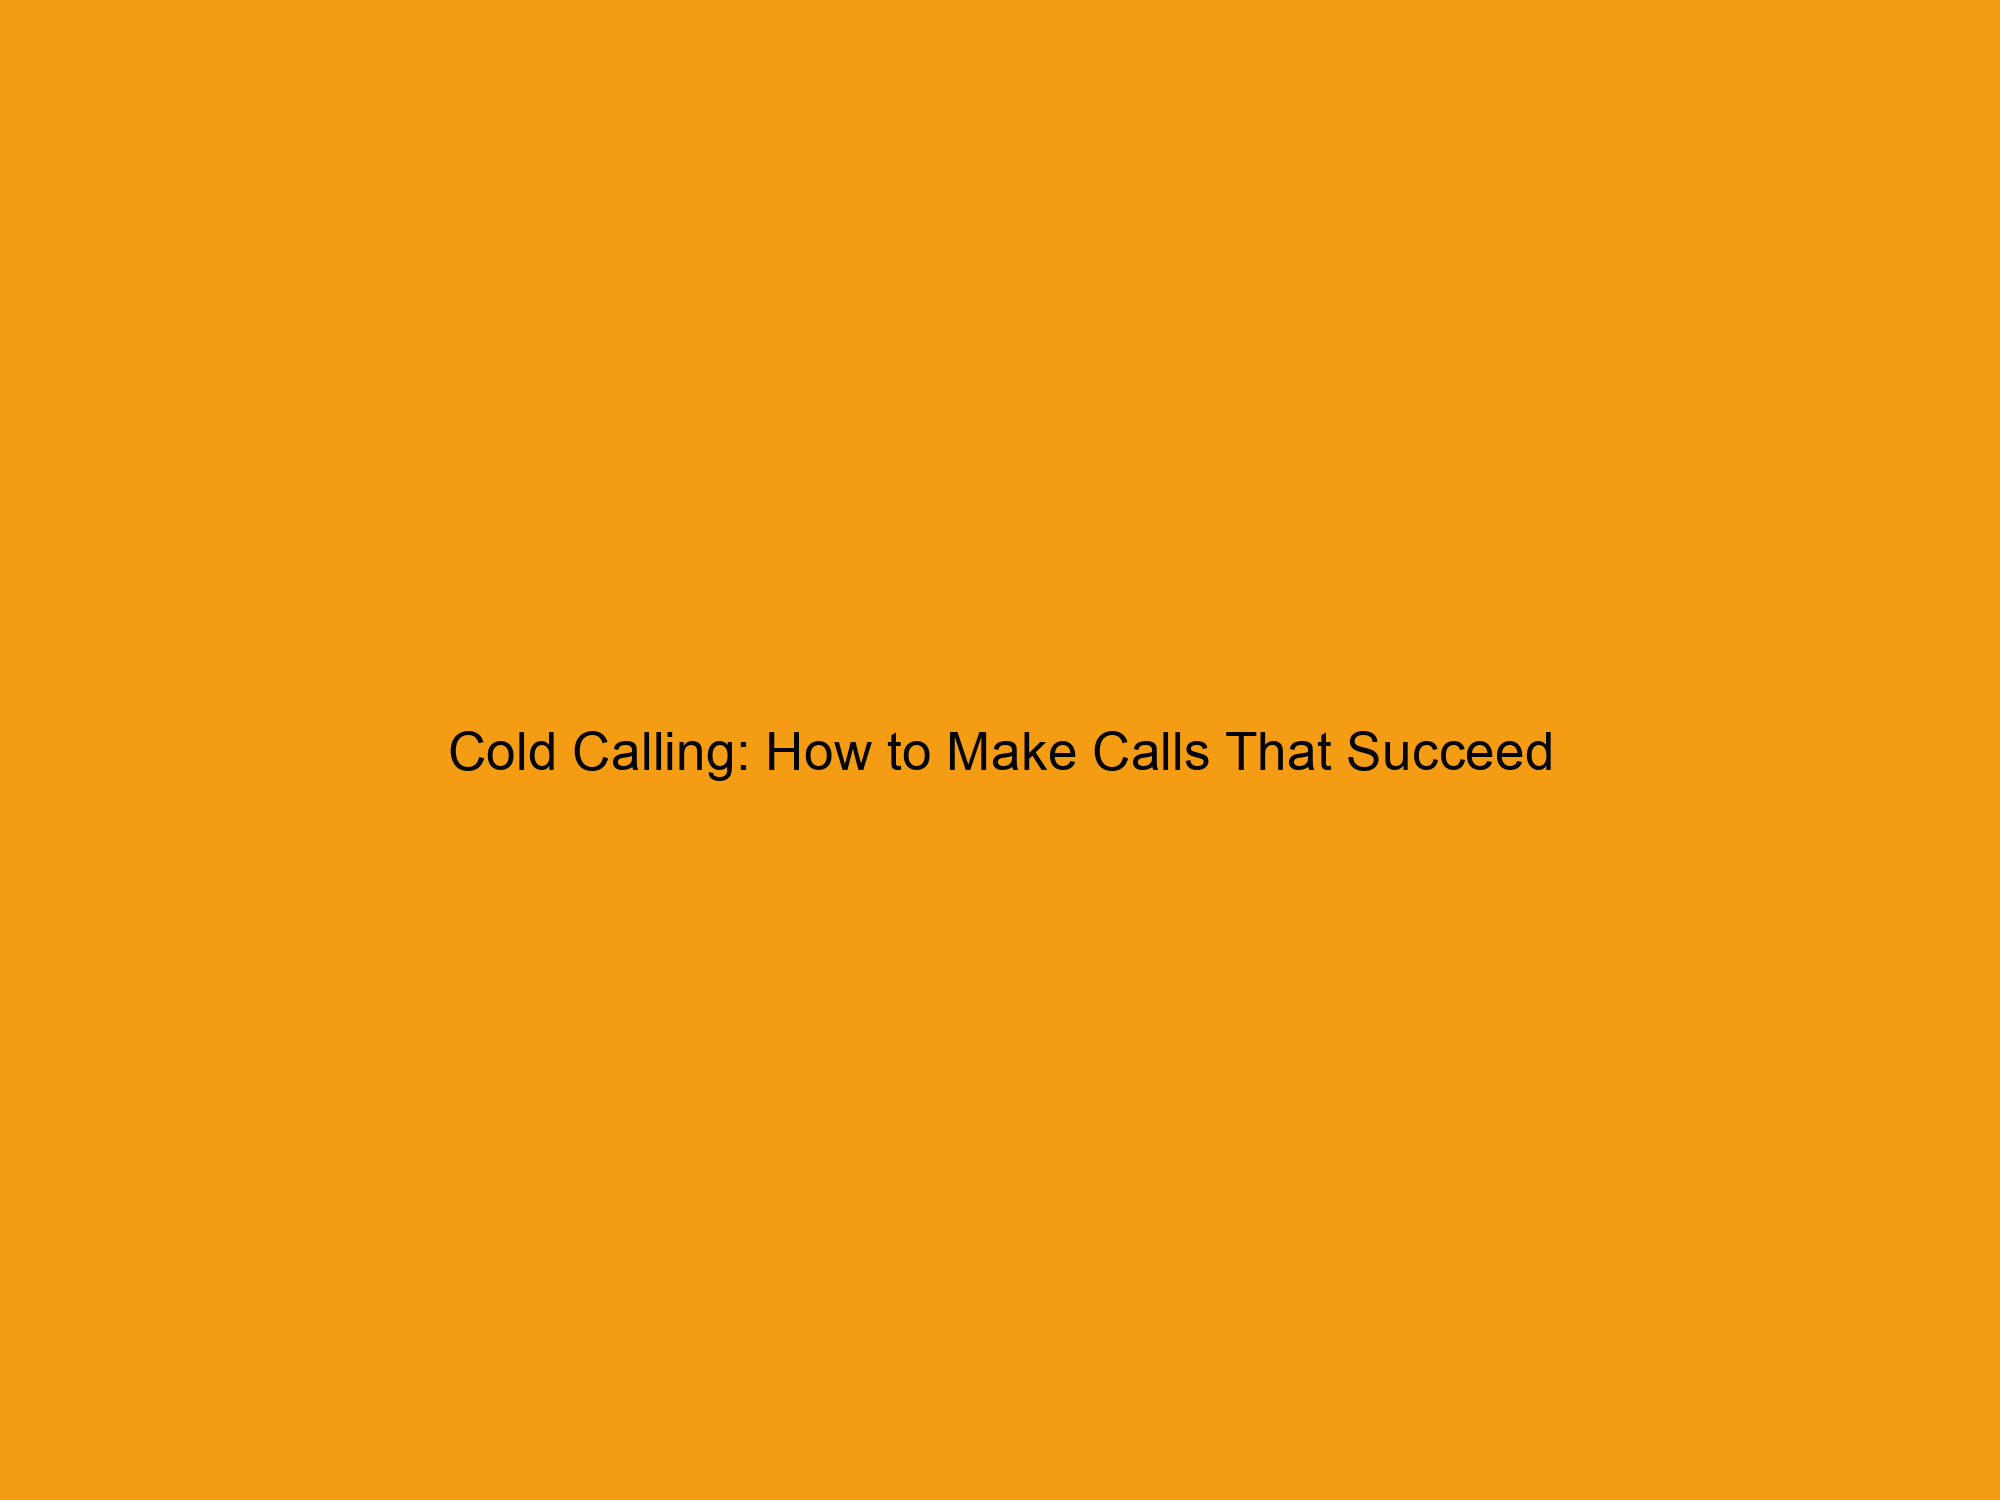 Cold Calling: How to Make Calls That Succeed